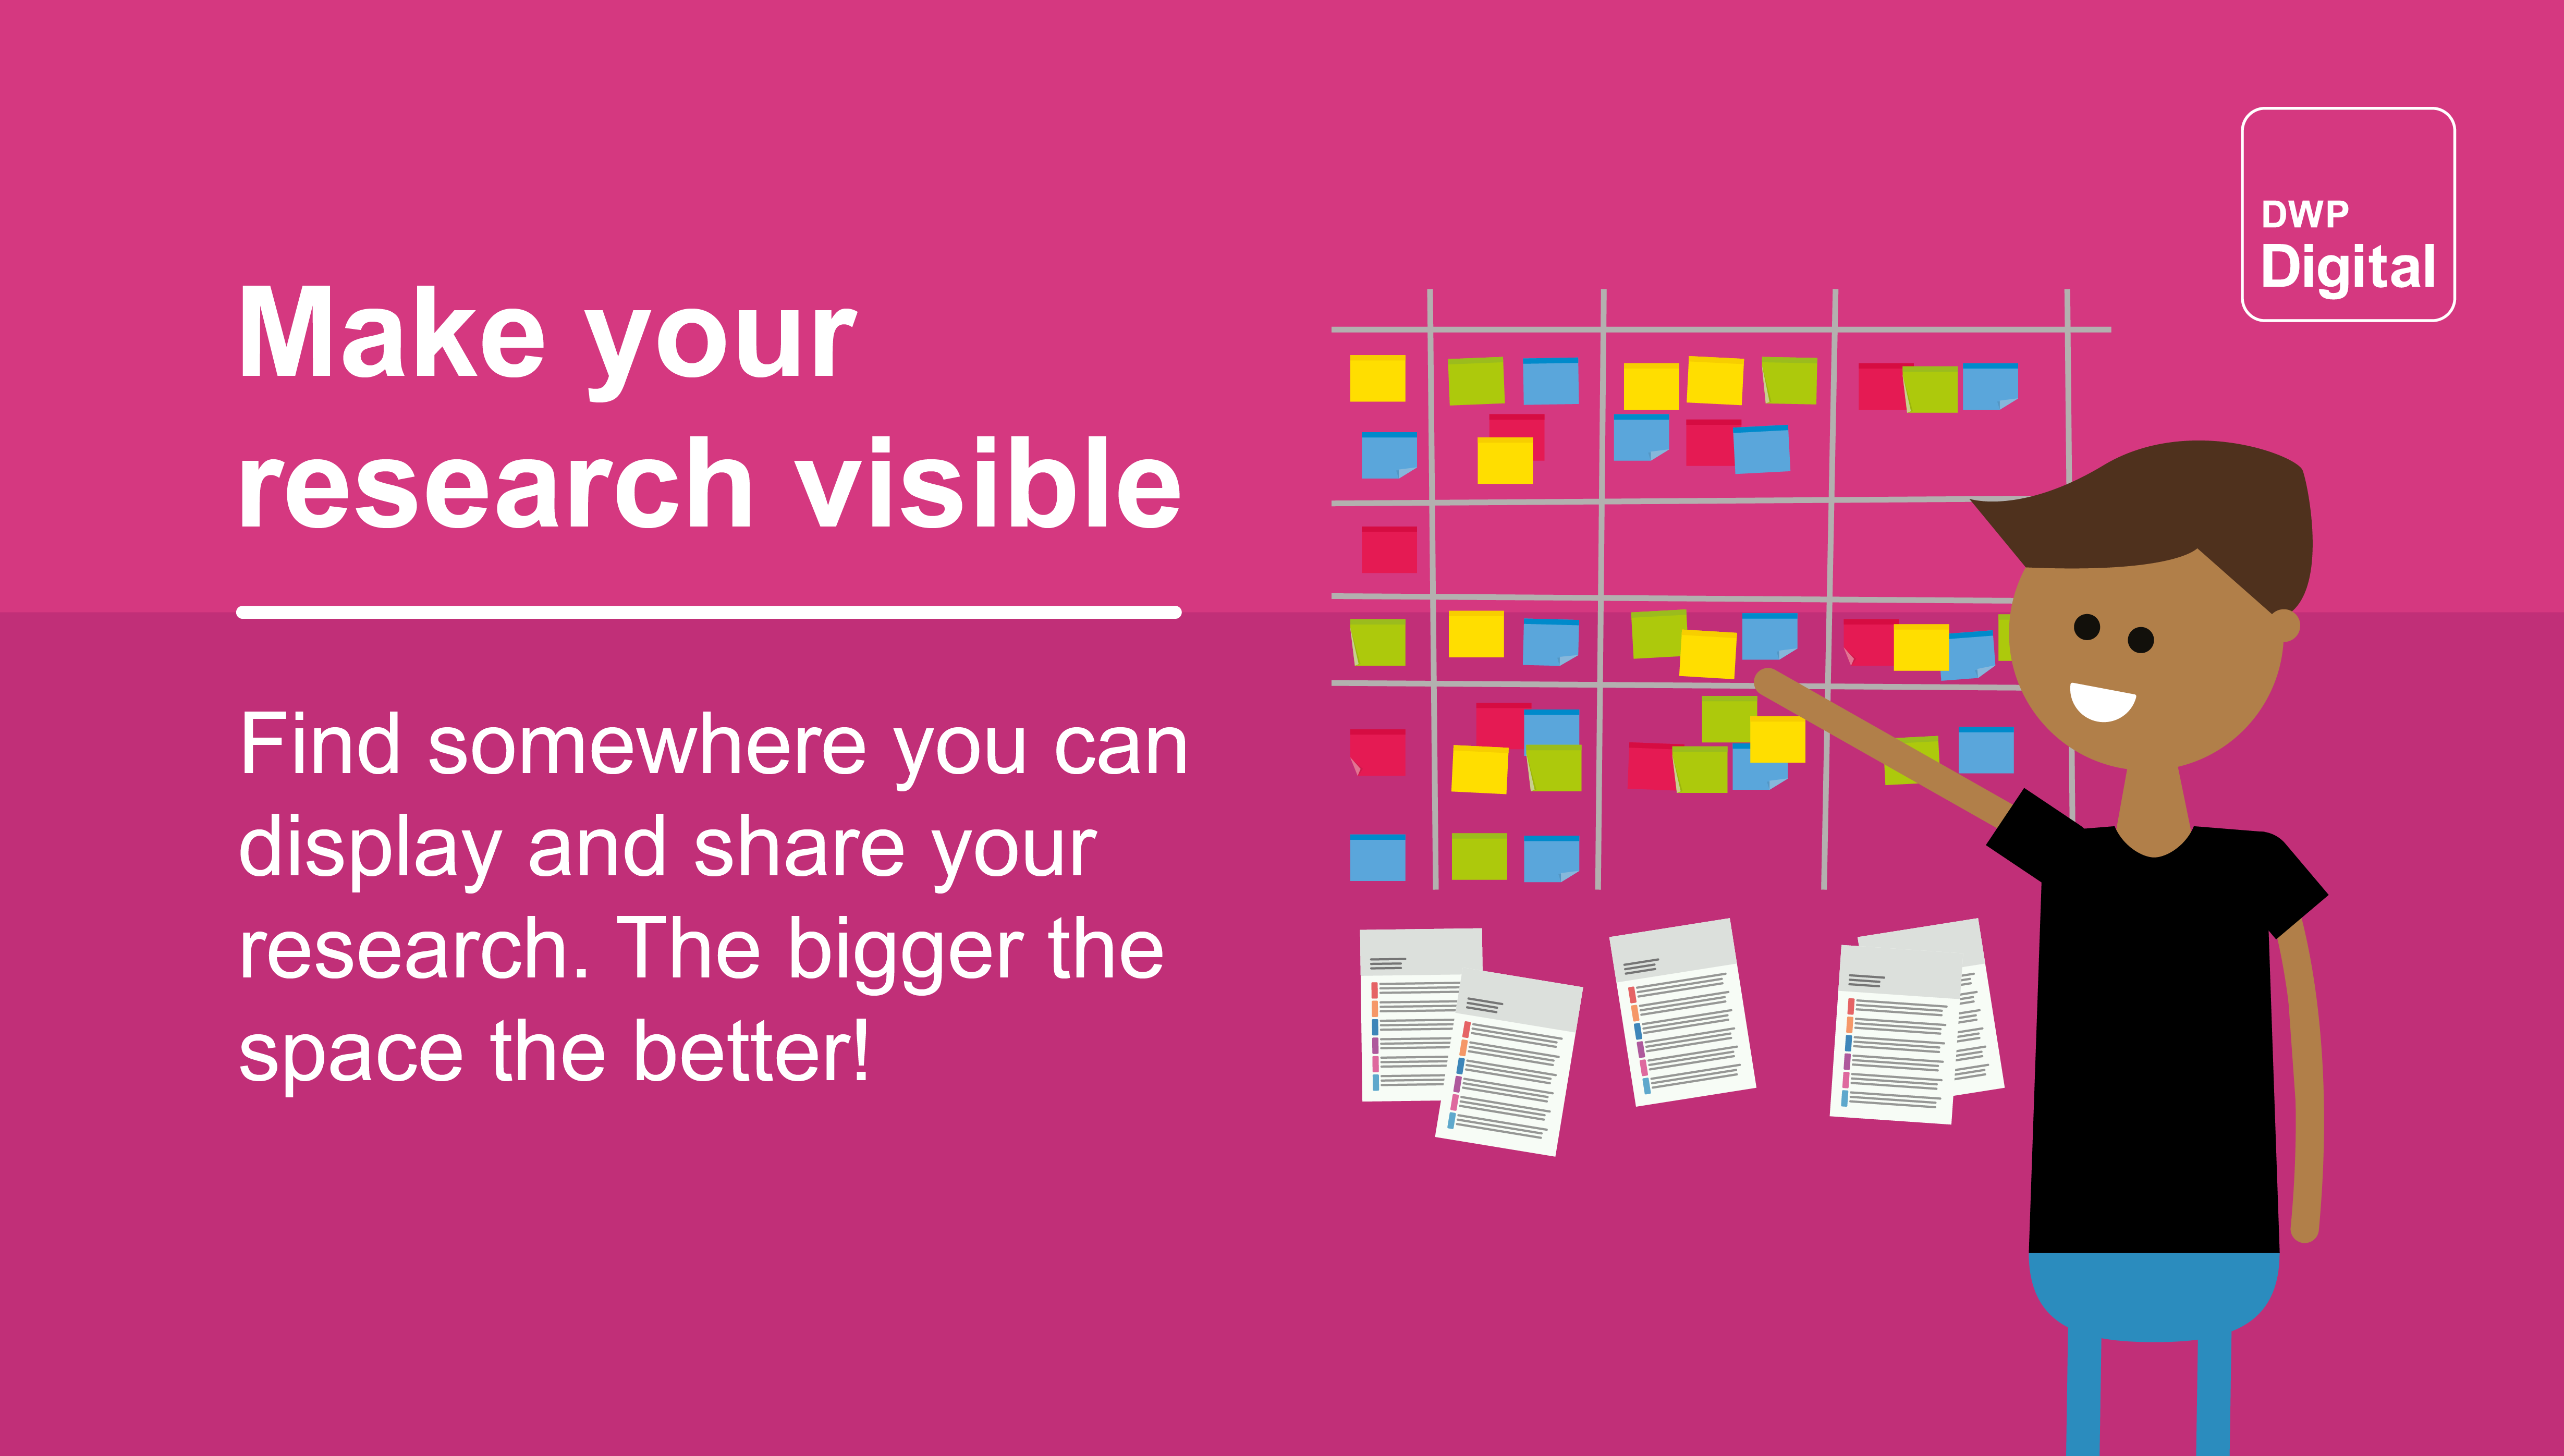 Graphic showing a person in front of a kanban style wall, with the text: "Find somewhere you can display and share your research. The bigger the space the better!"